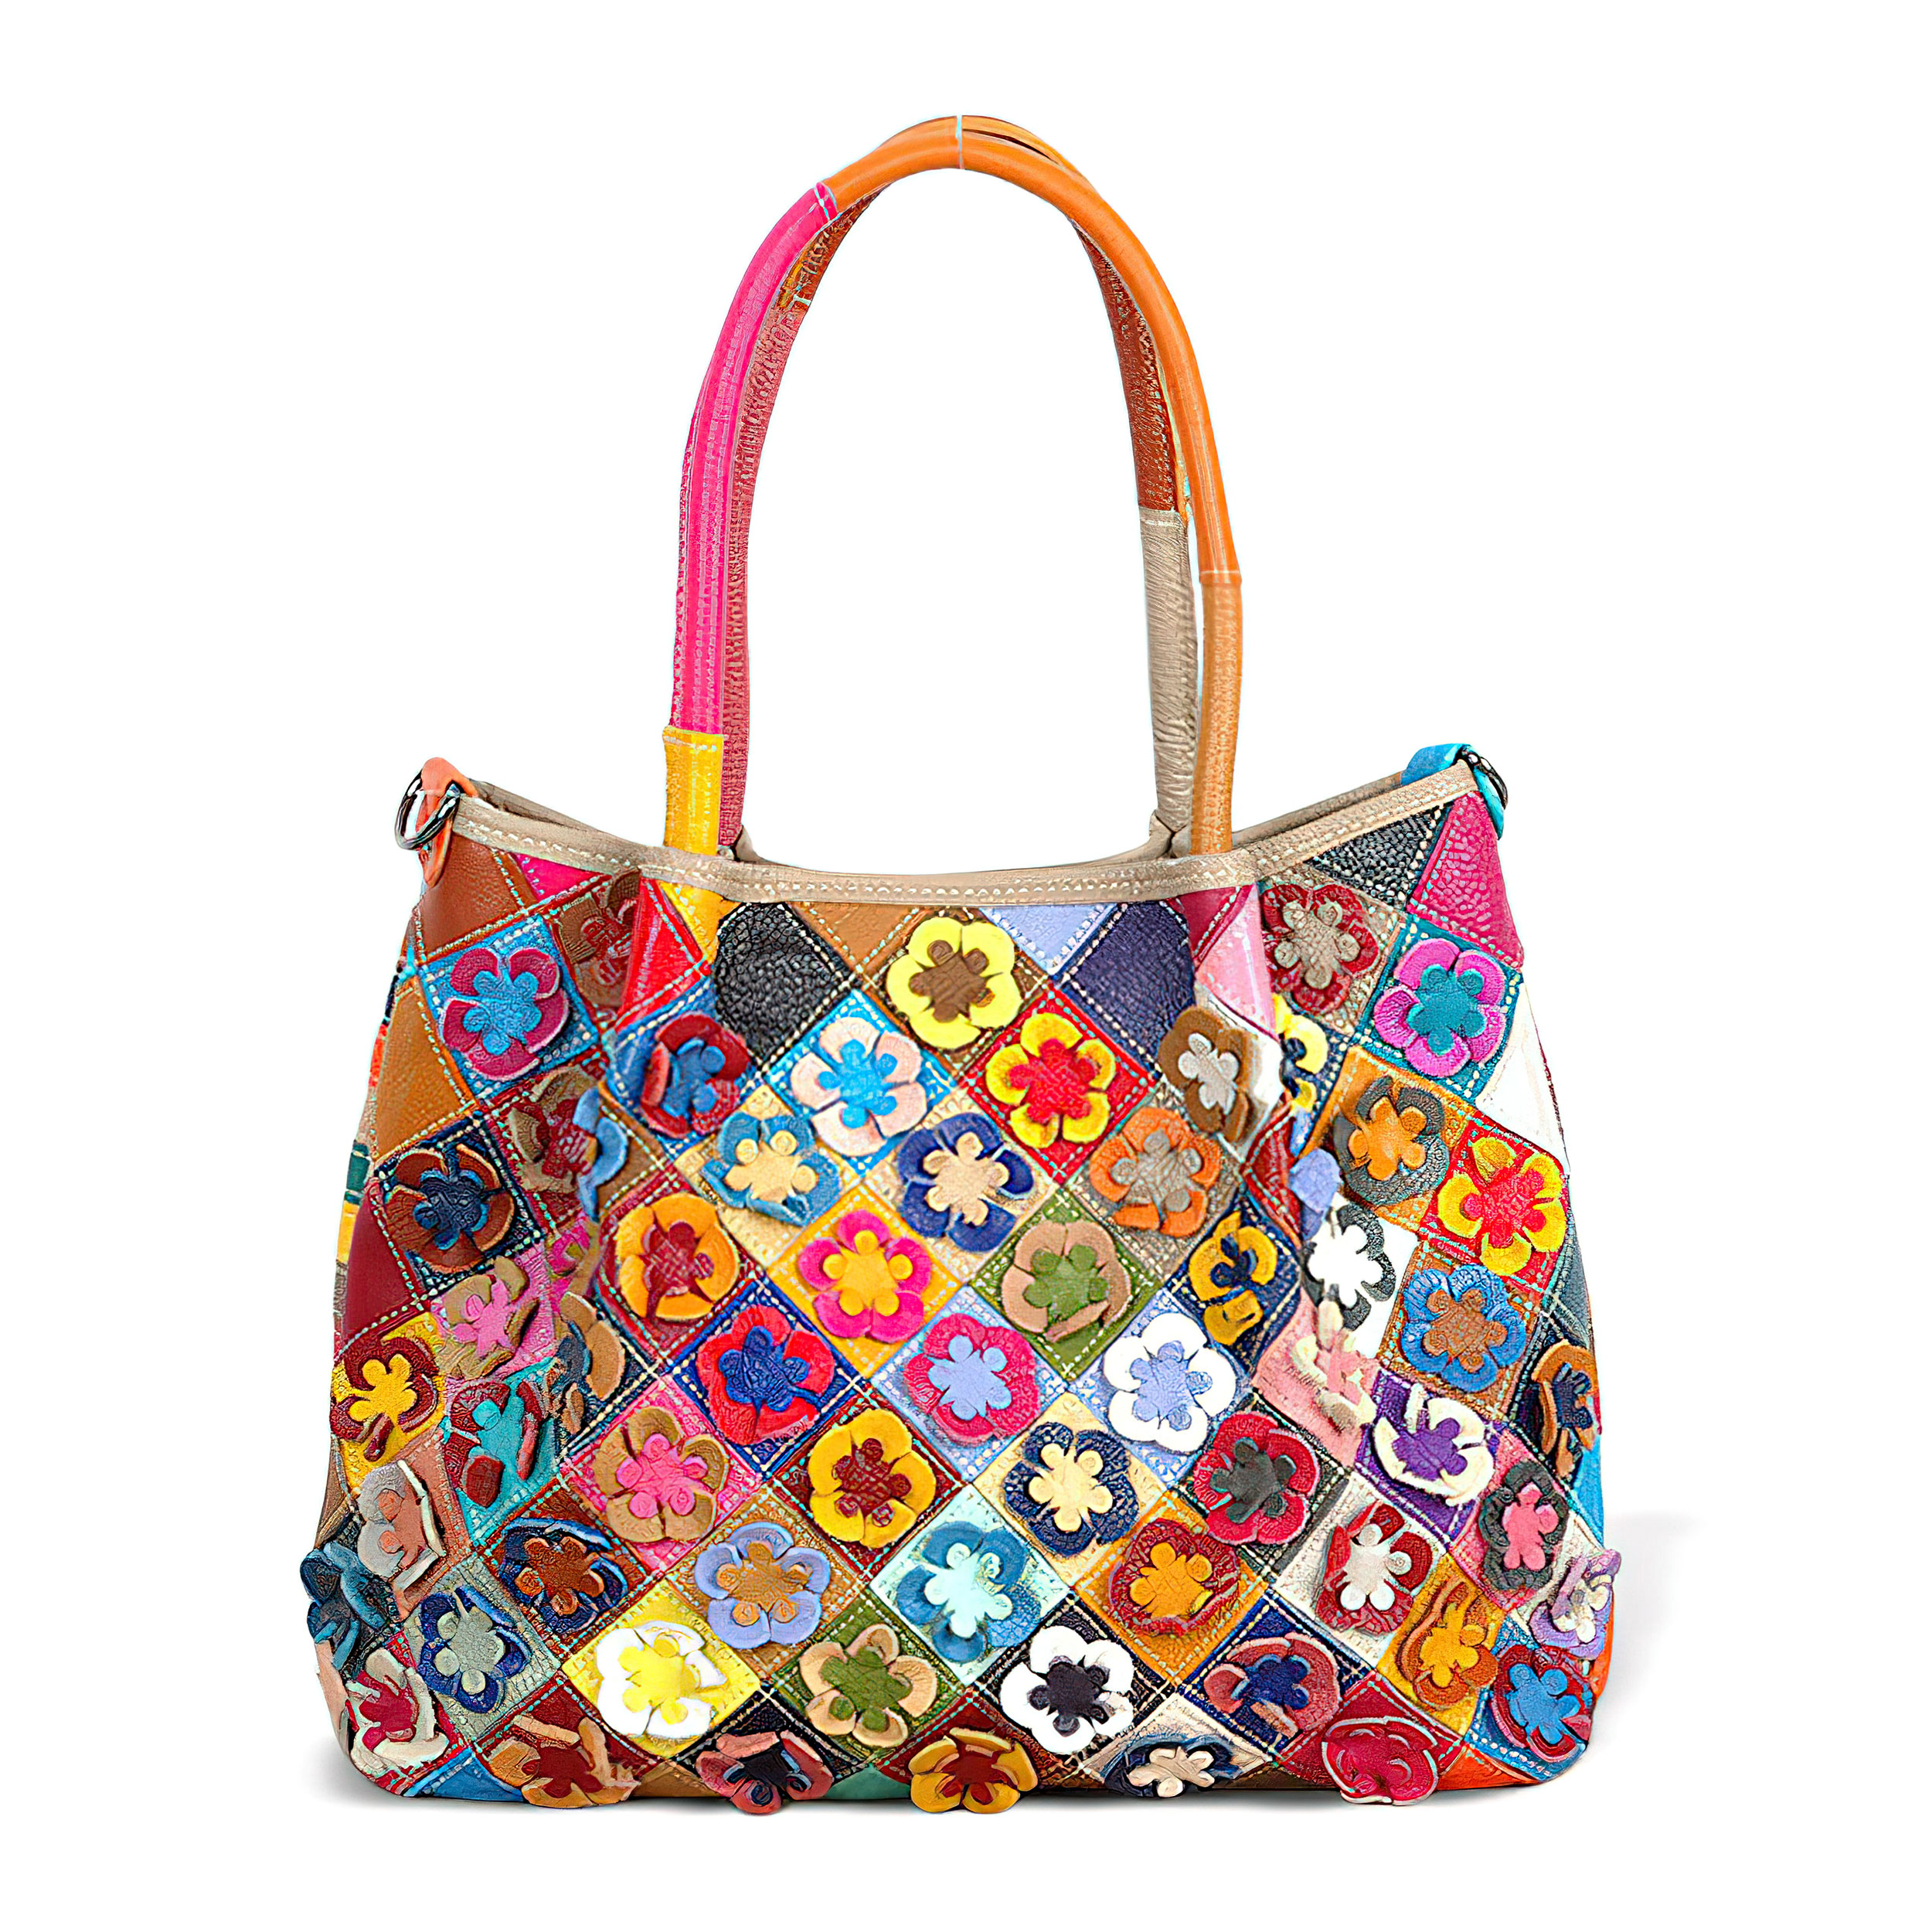 Handmade Flower Patchwork Leather Tote Cross Body